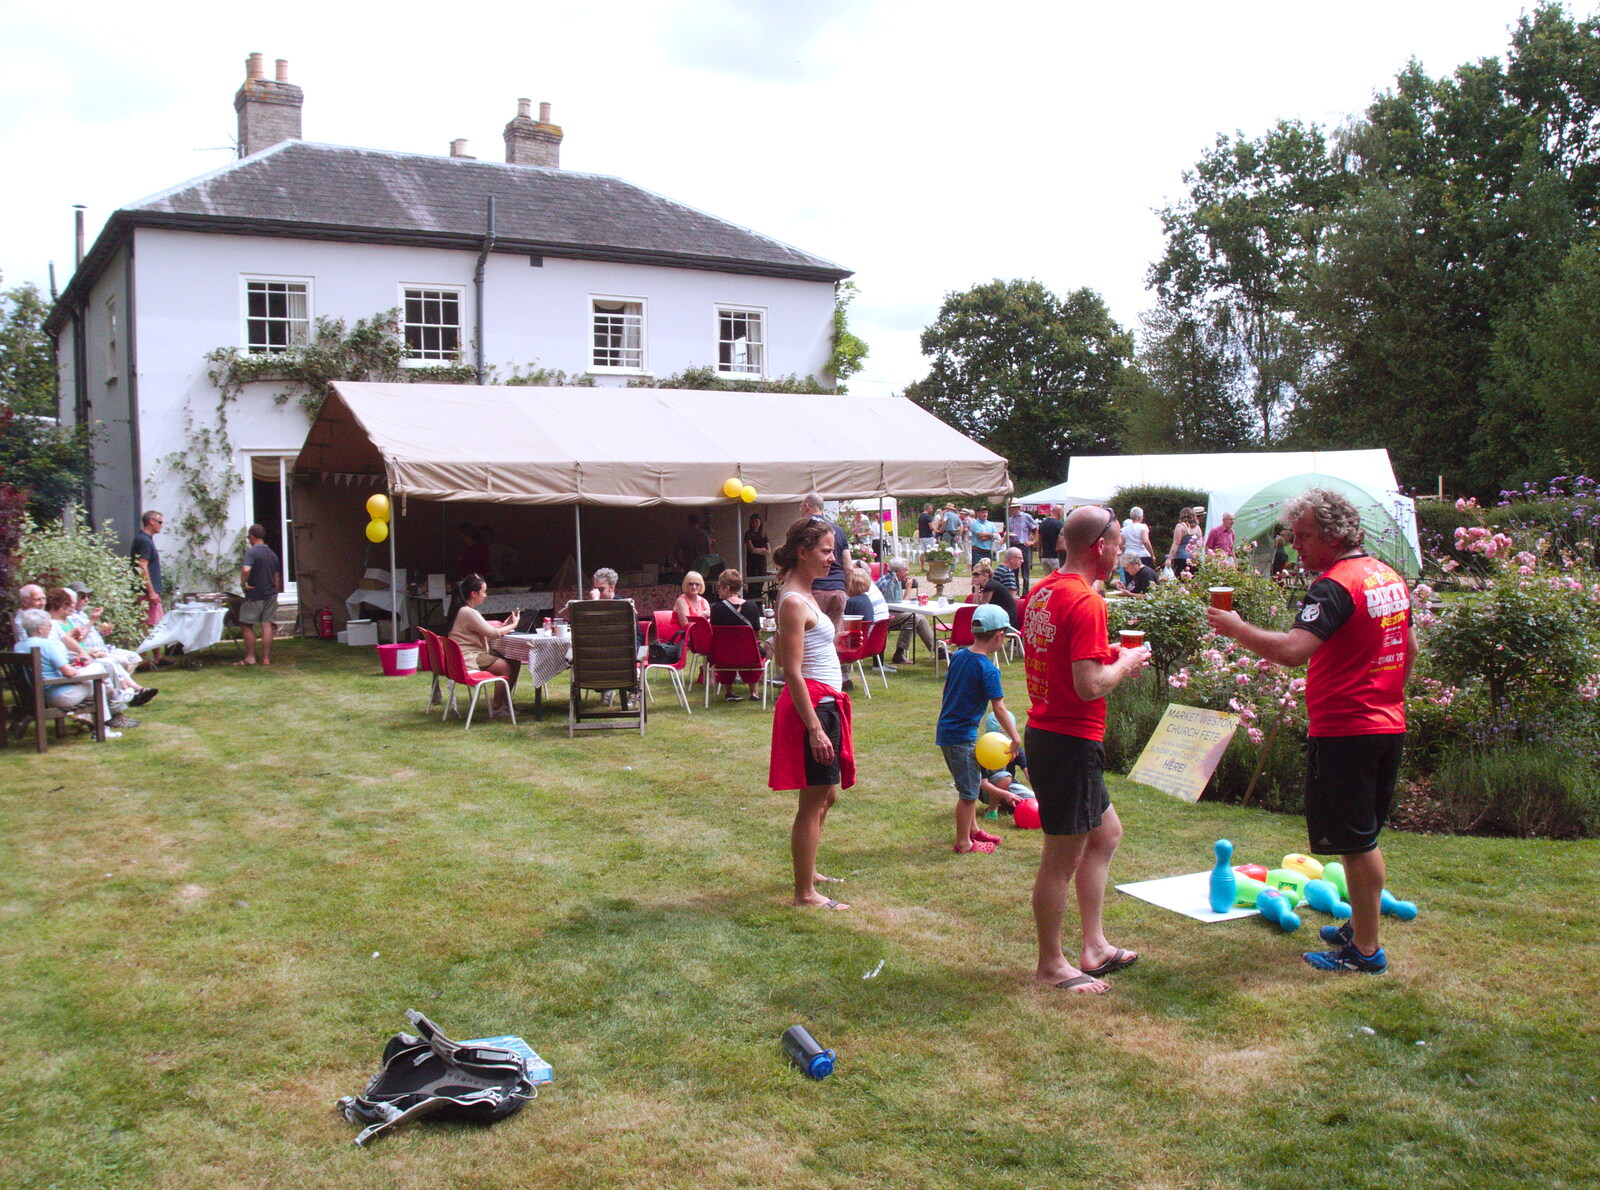 In the gardens of the Old Rectory from GSB at the Summer Fete, Market Weston, Suffolk - 20th July 2019